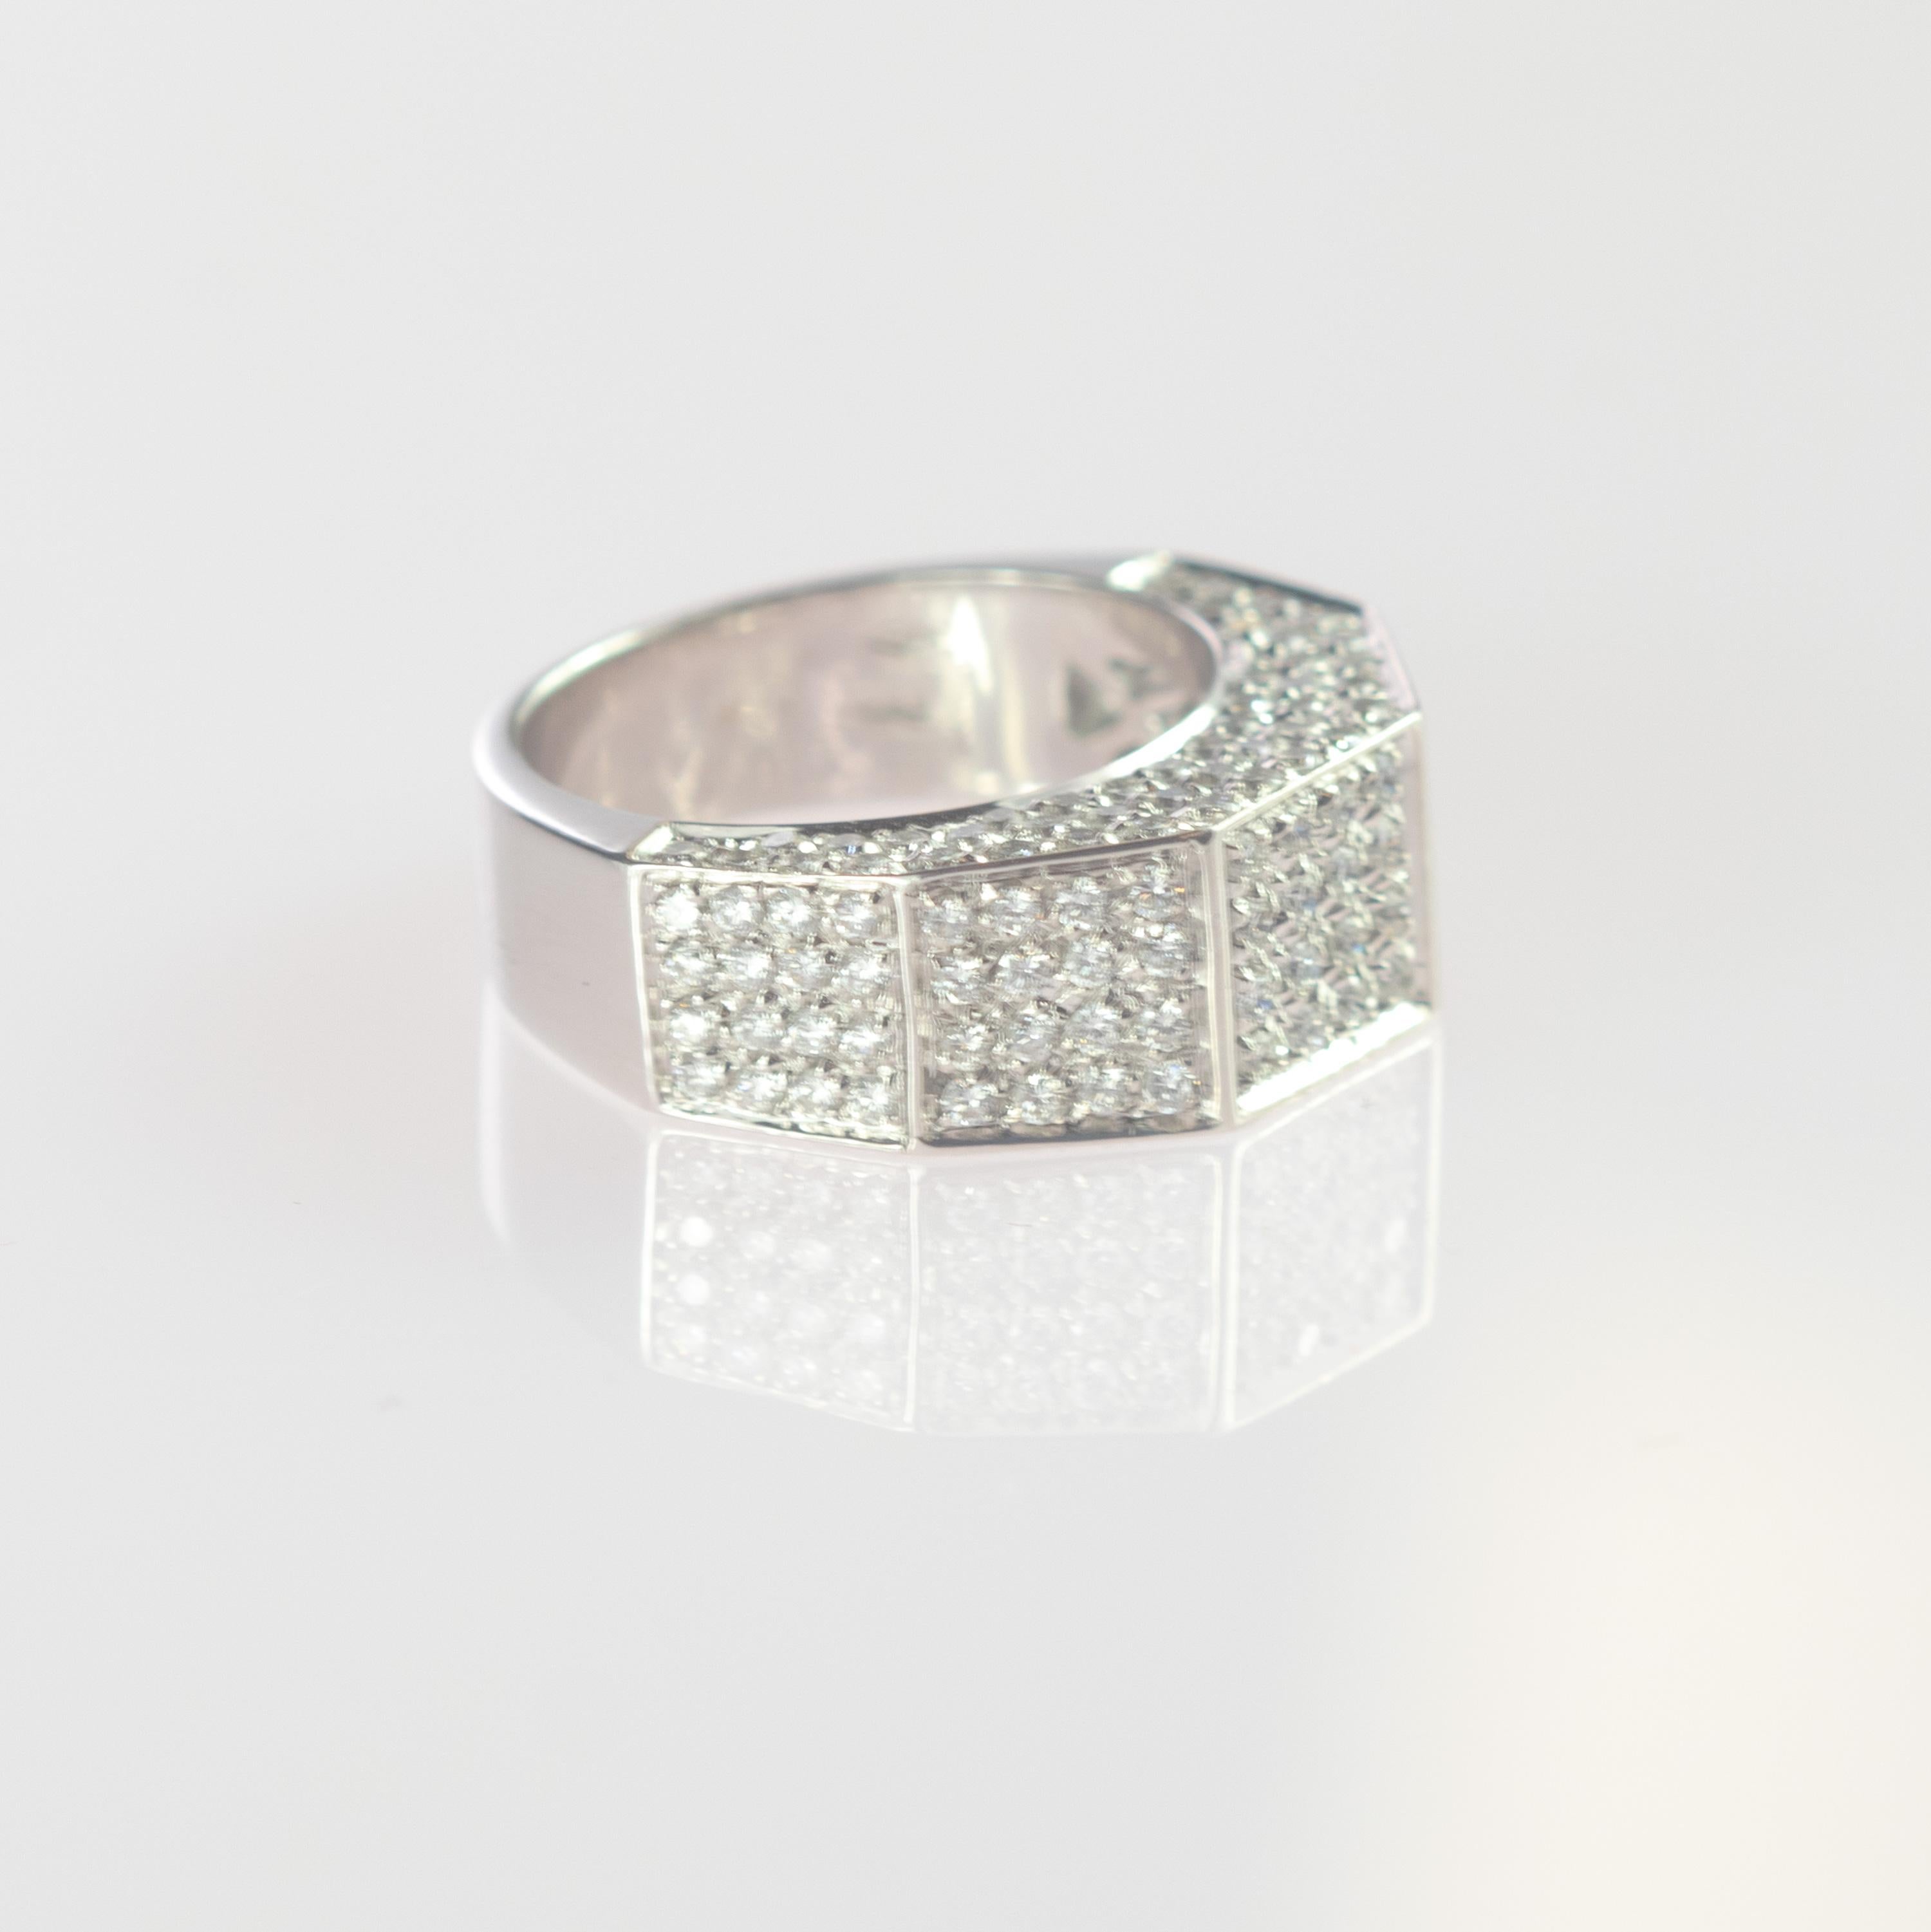 Brilliant Cut Intini Jewels 1.57 Carat Diamond Cluster 18 Karat White Gold Band Cocktail Ring For Sale